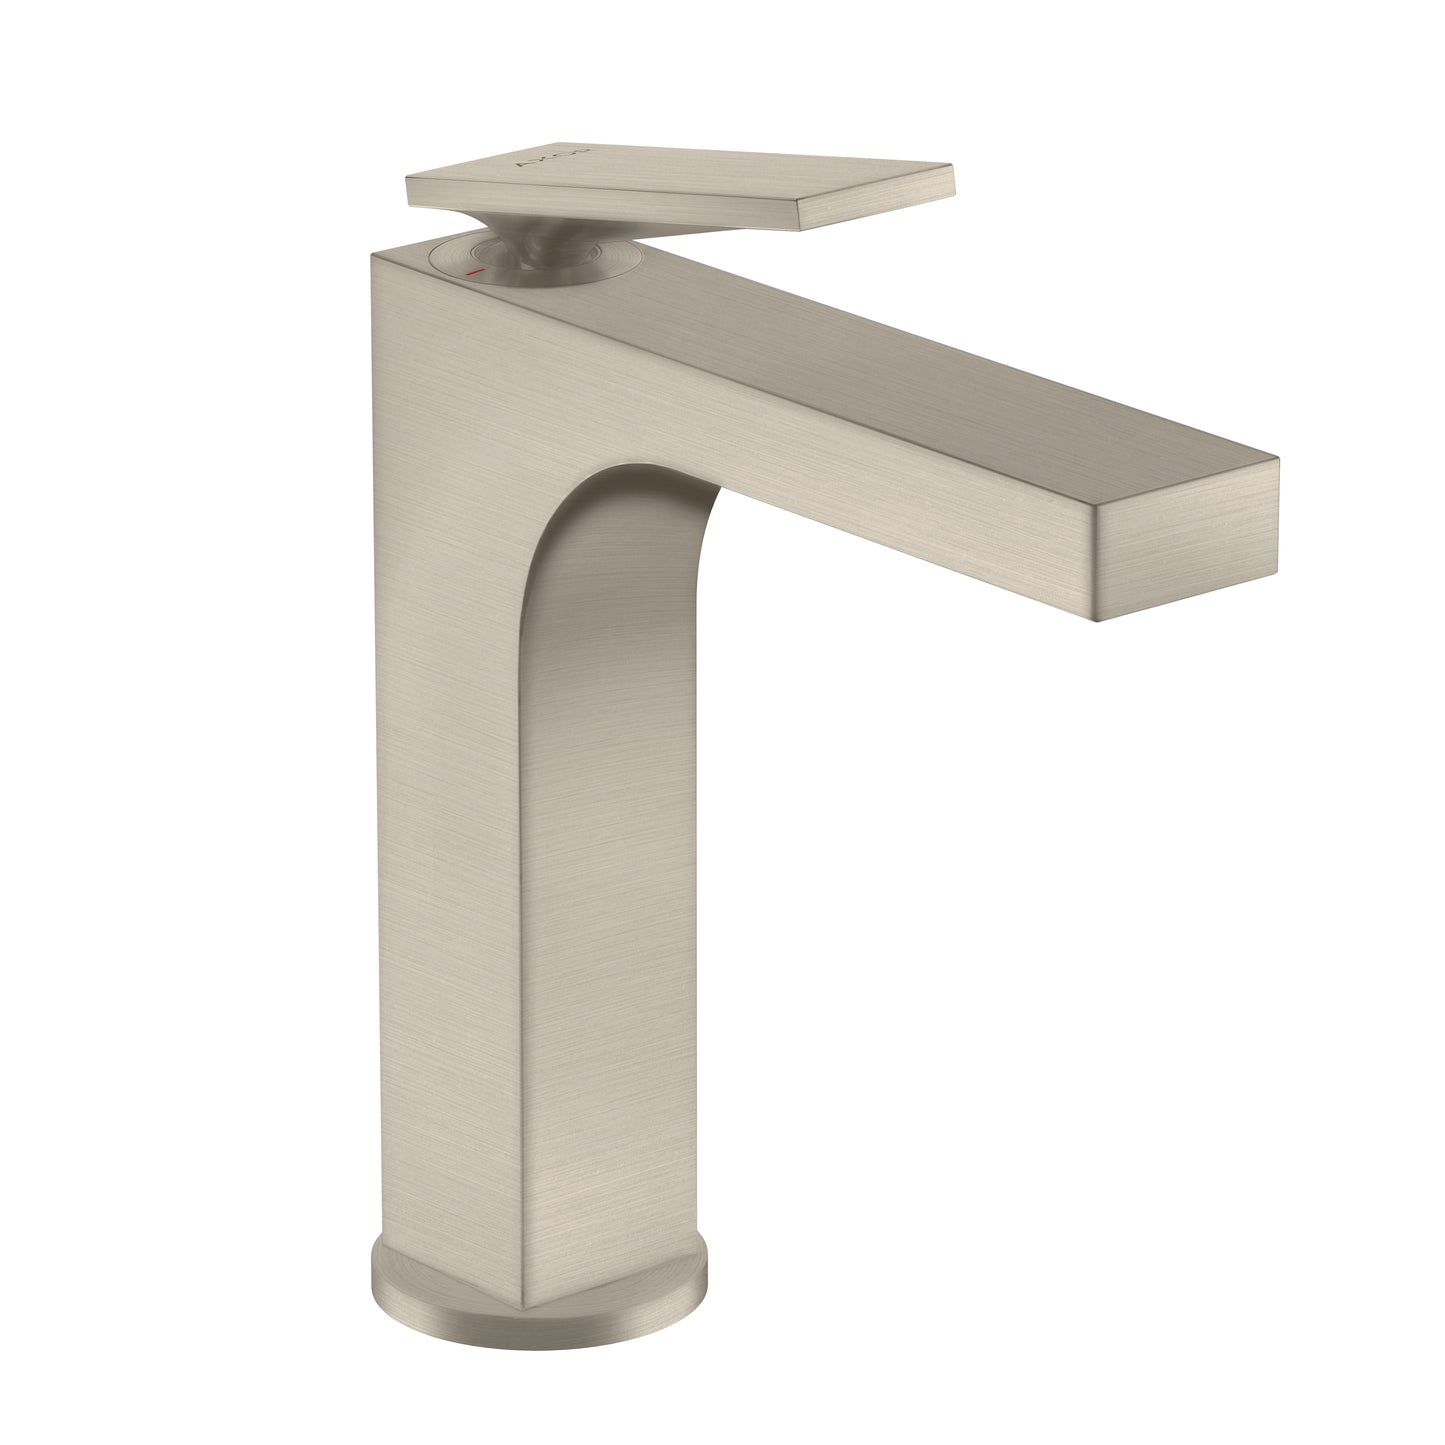 AXOR 39023821 Brushed Nickel Citterio Modern Single Hole Bathroom Faucet 1.2 GPM